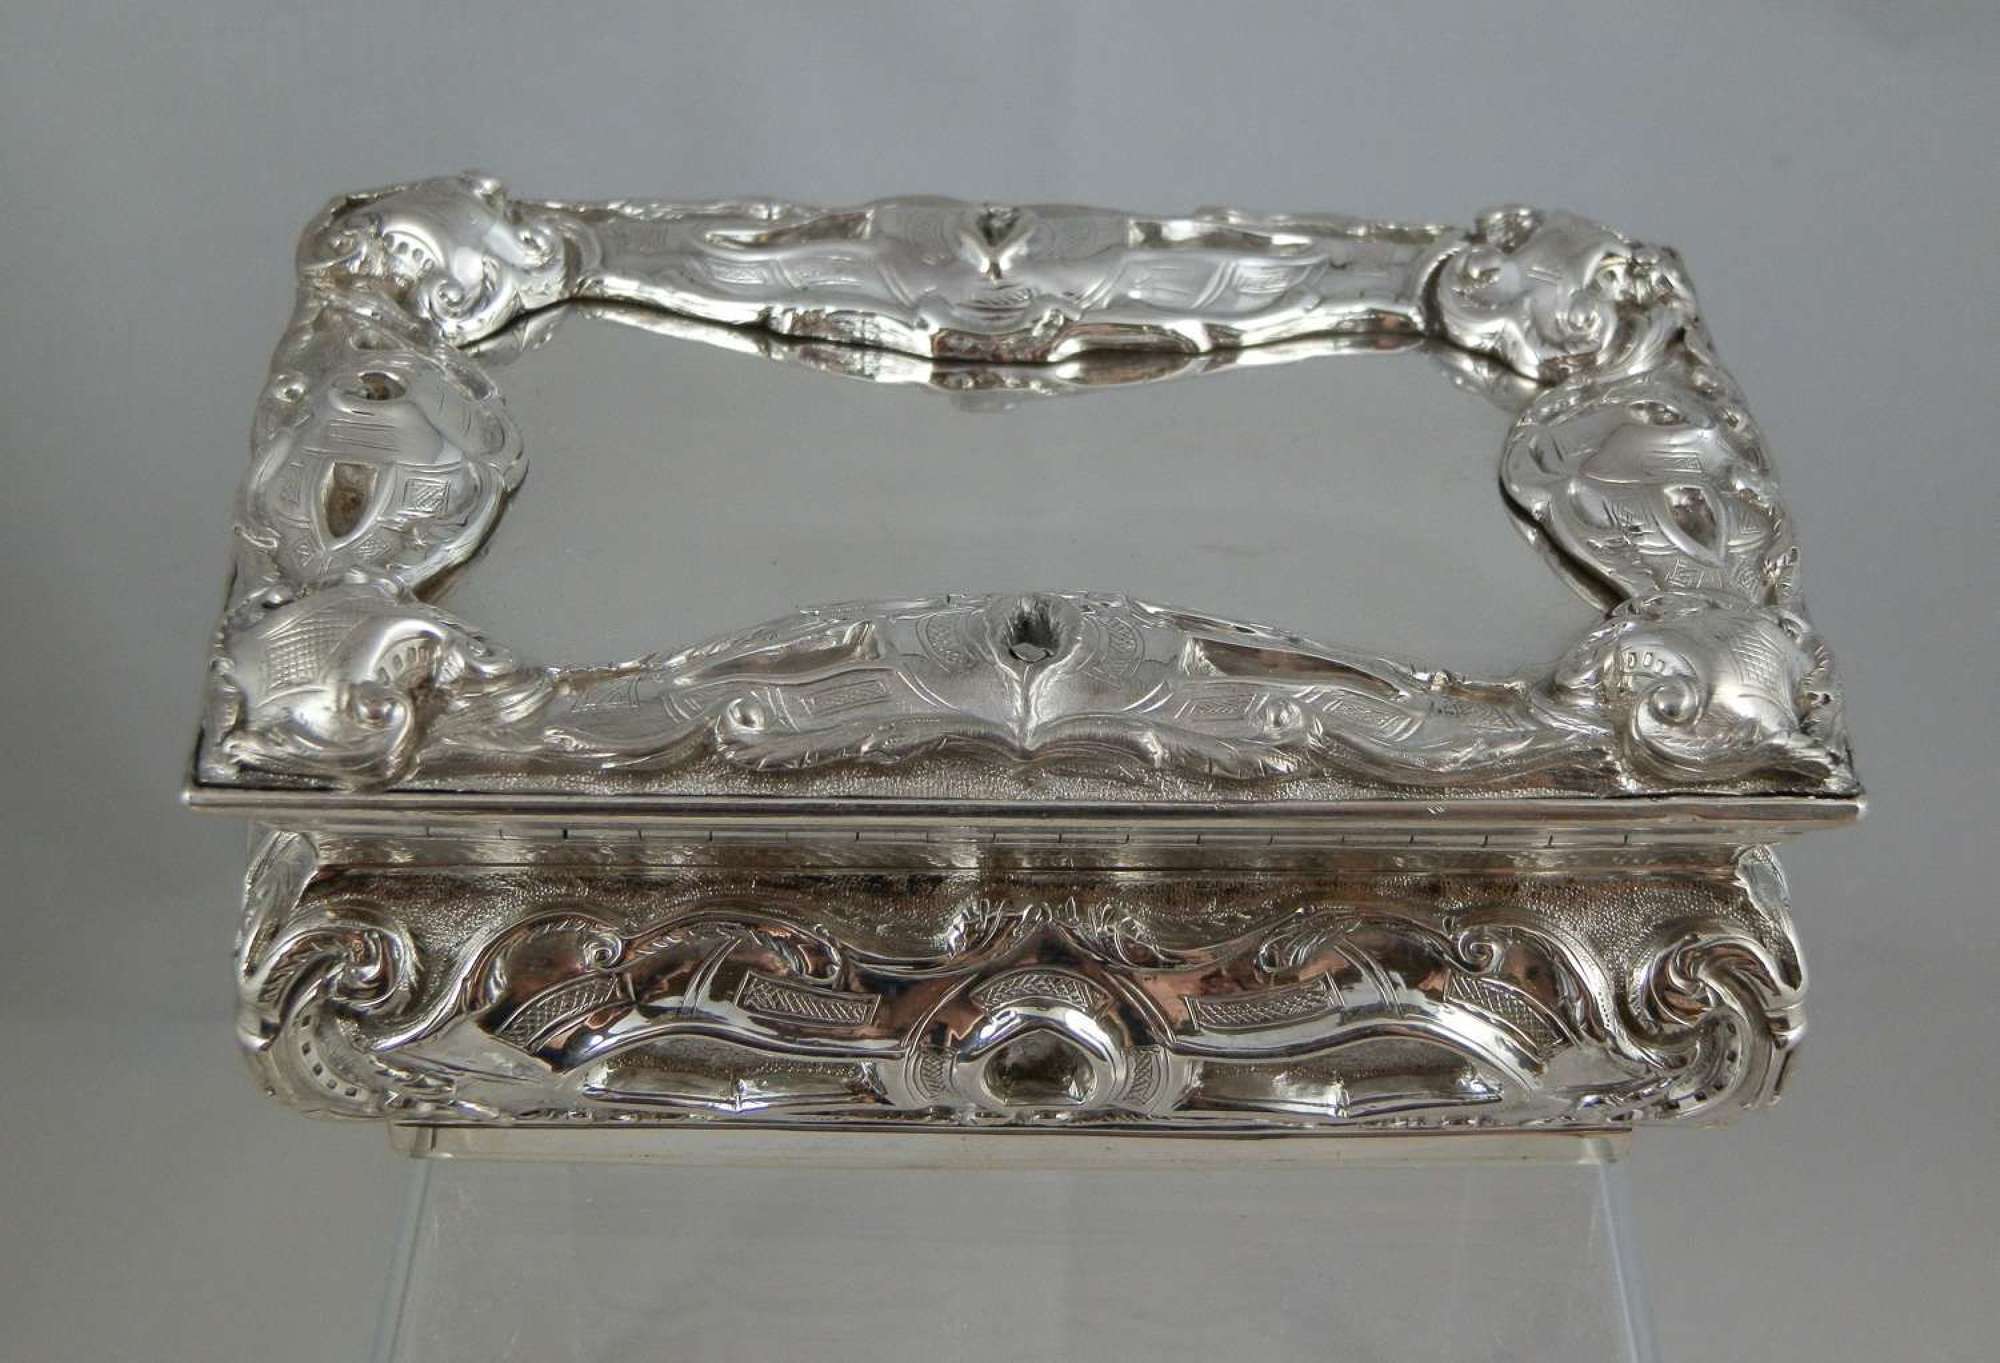 A very large Victorian silver table snuff box by Aston & Son 1858